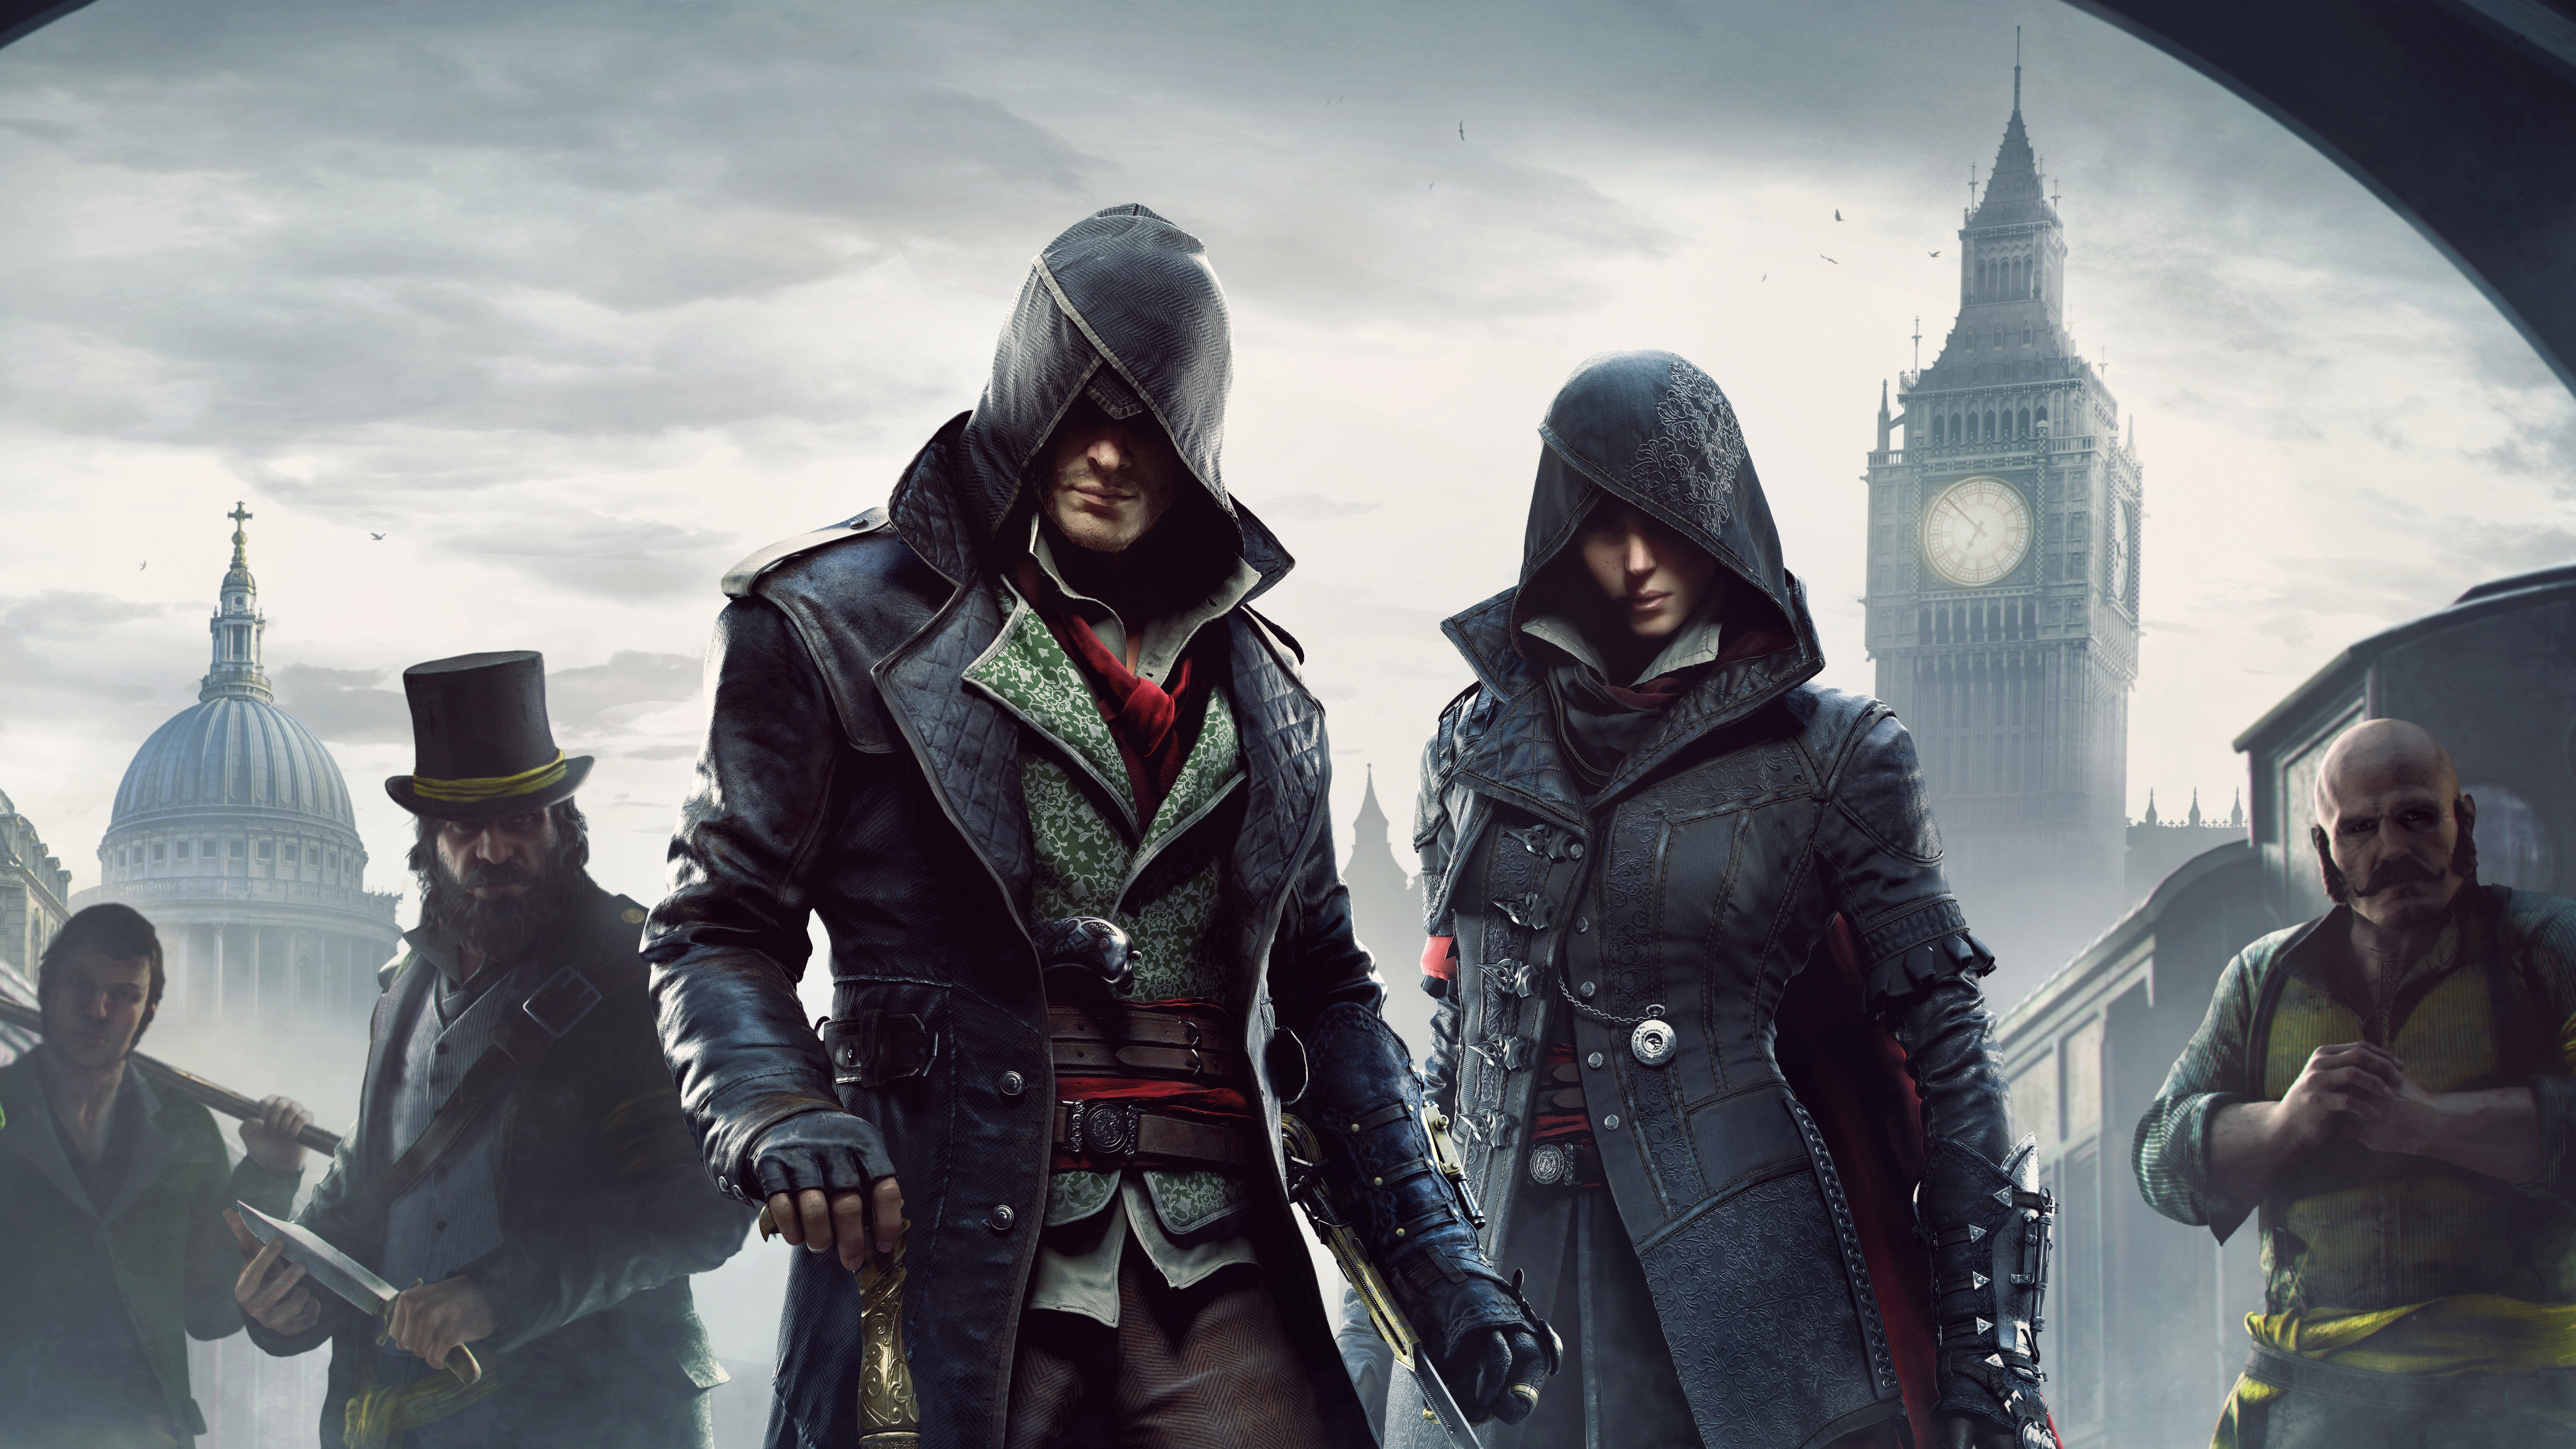 Assassins Creed Syndicate, Ubisoft, pc Game, Film, Assassins Creed Unity. Wallpaper in 7680x4320 Resolution